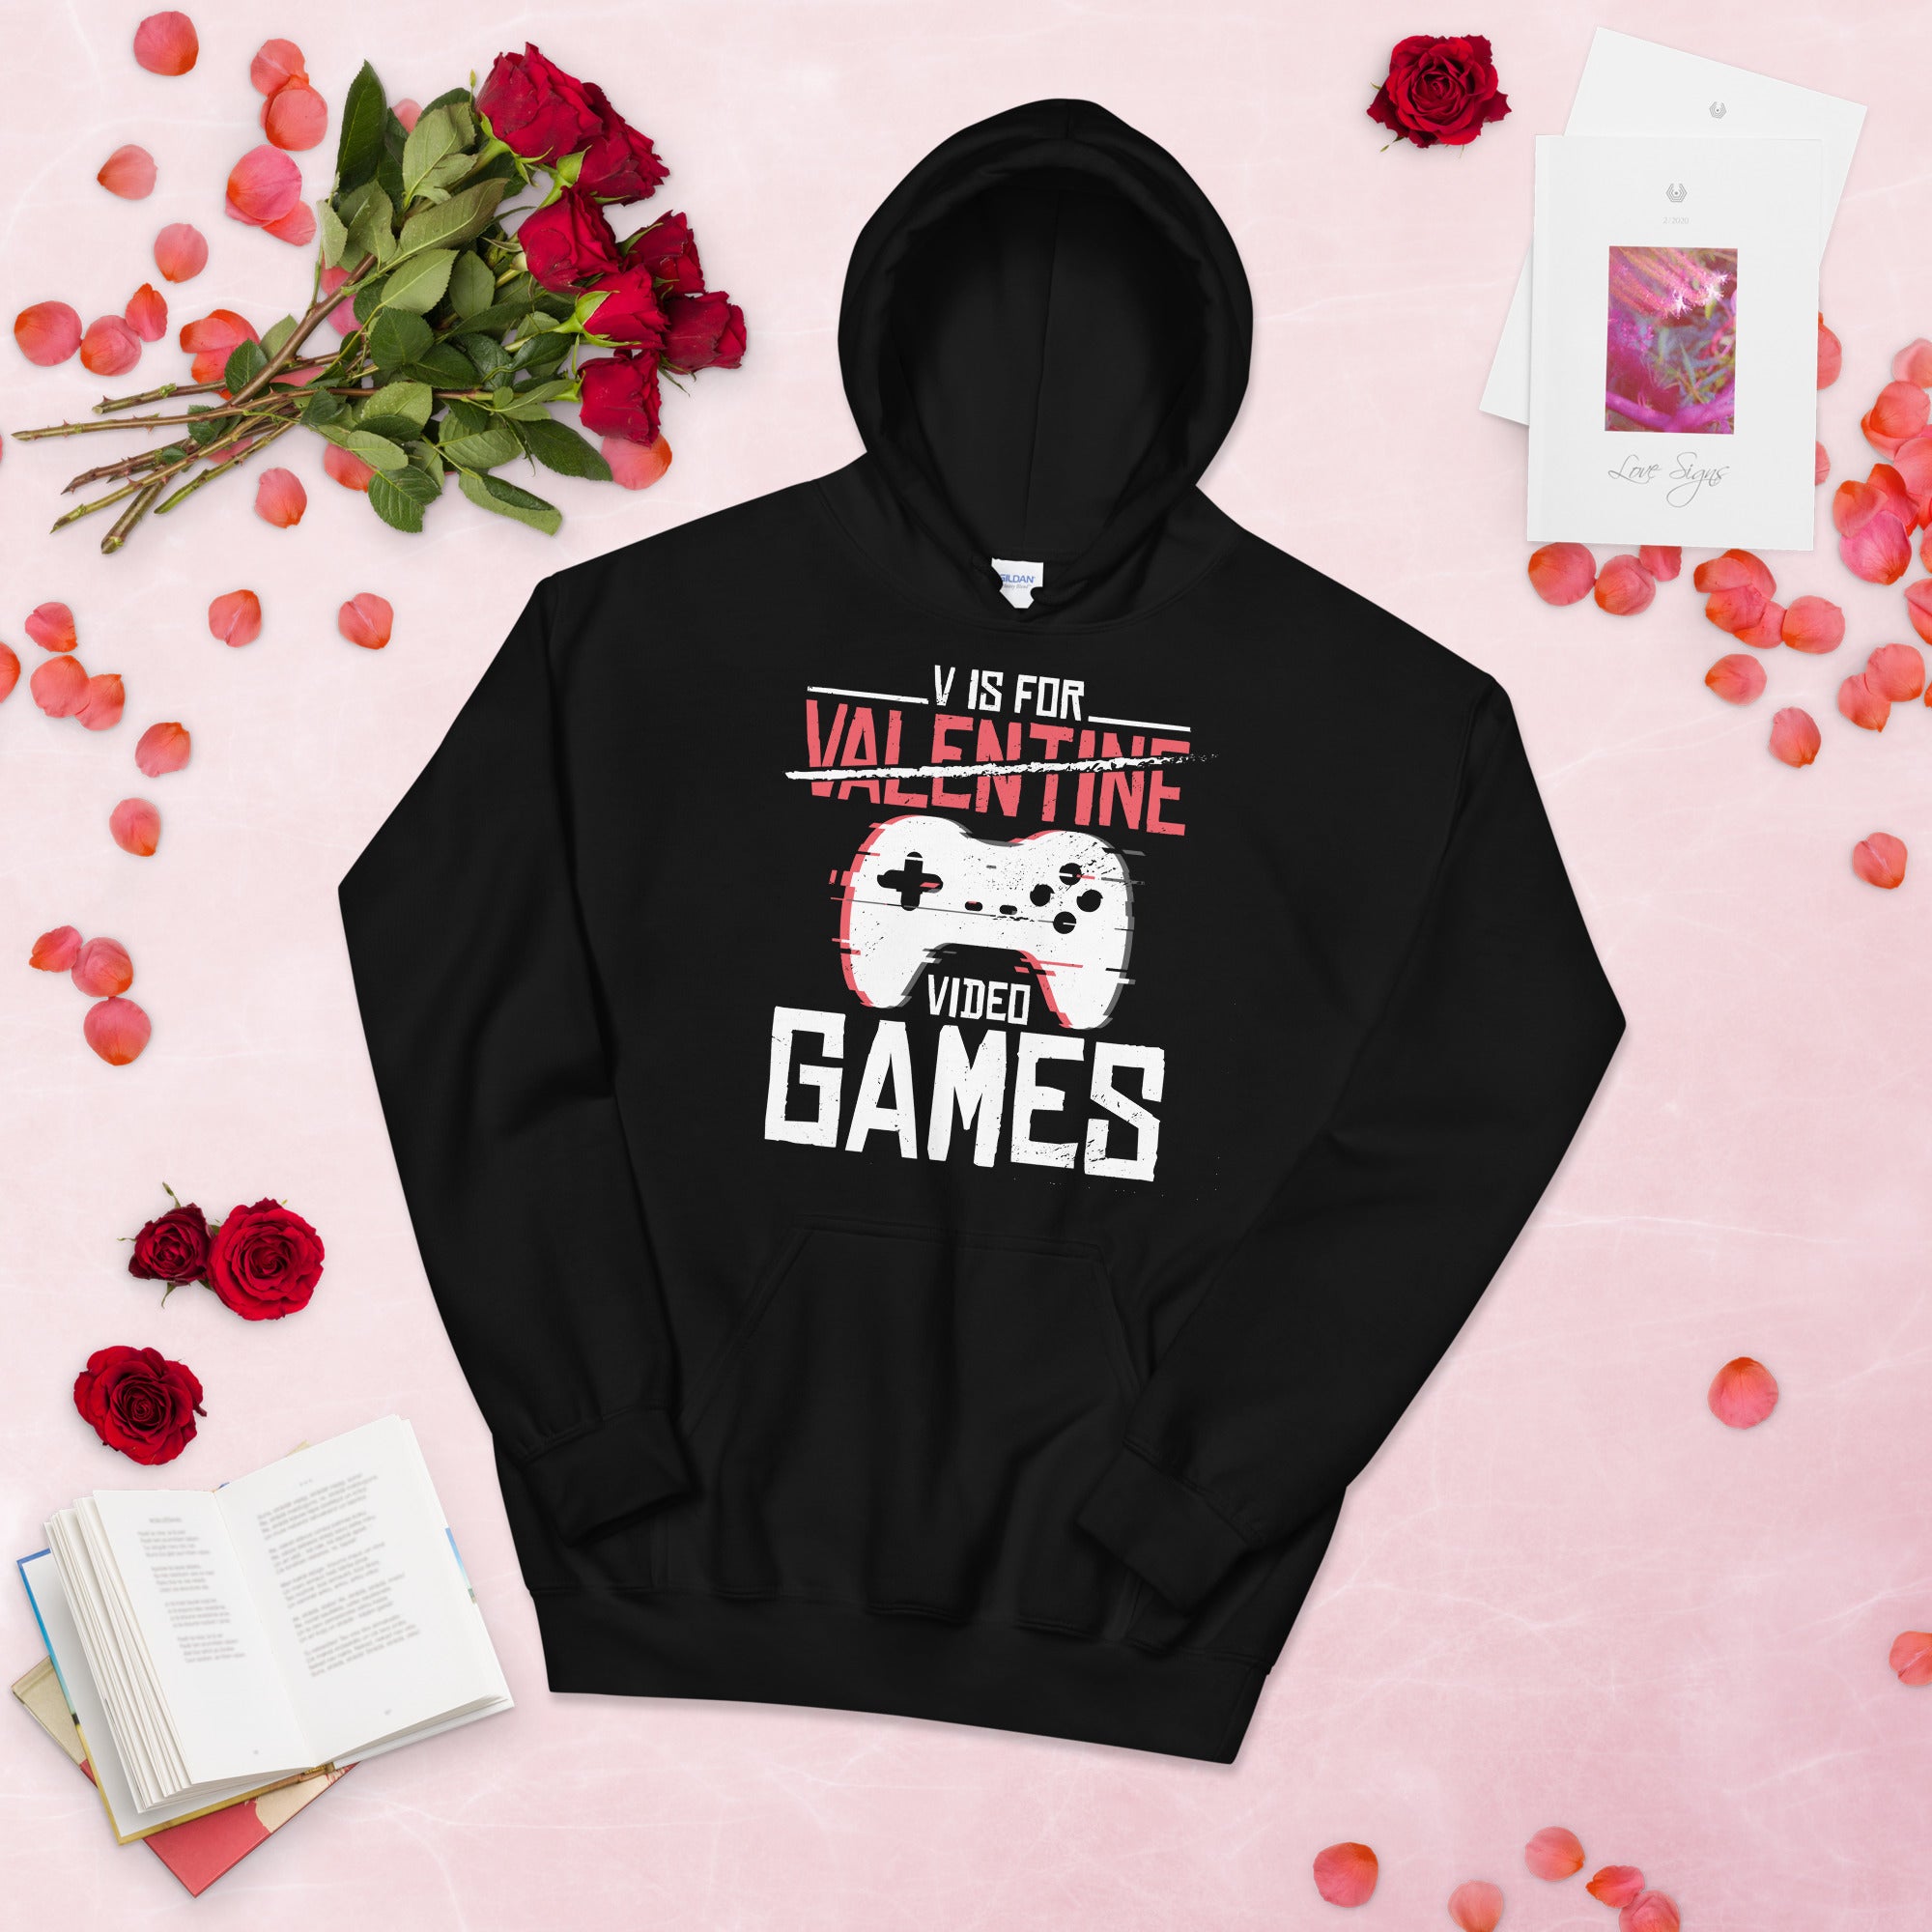 V Is For Video Games Hoodie, Video Game Hoodie, Gift For Gamer, Game Lover Shirt, Gaming TShirt, Funny Gaming Shirts, Anti Valentines Hoodie - Madeinsea©